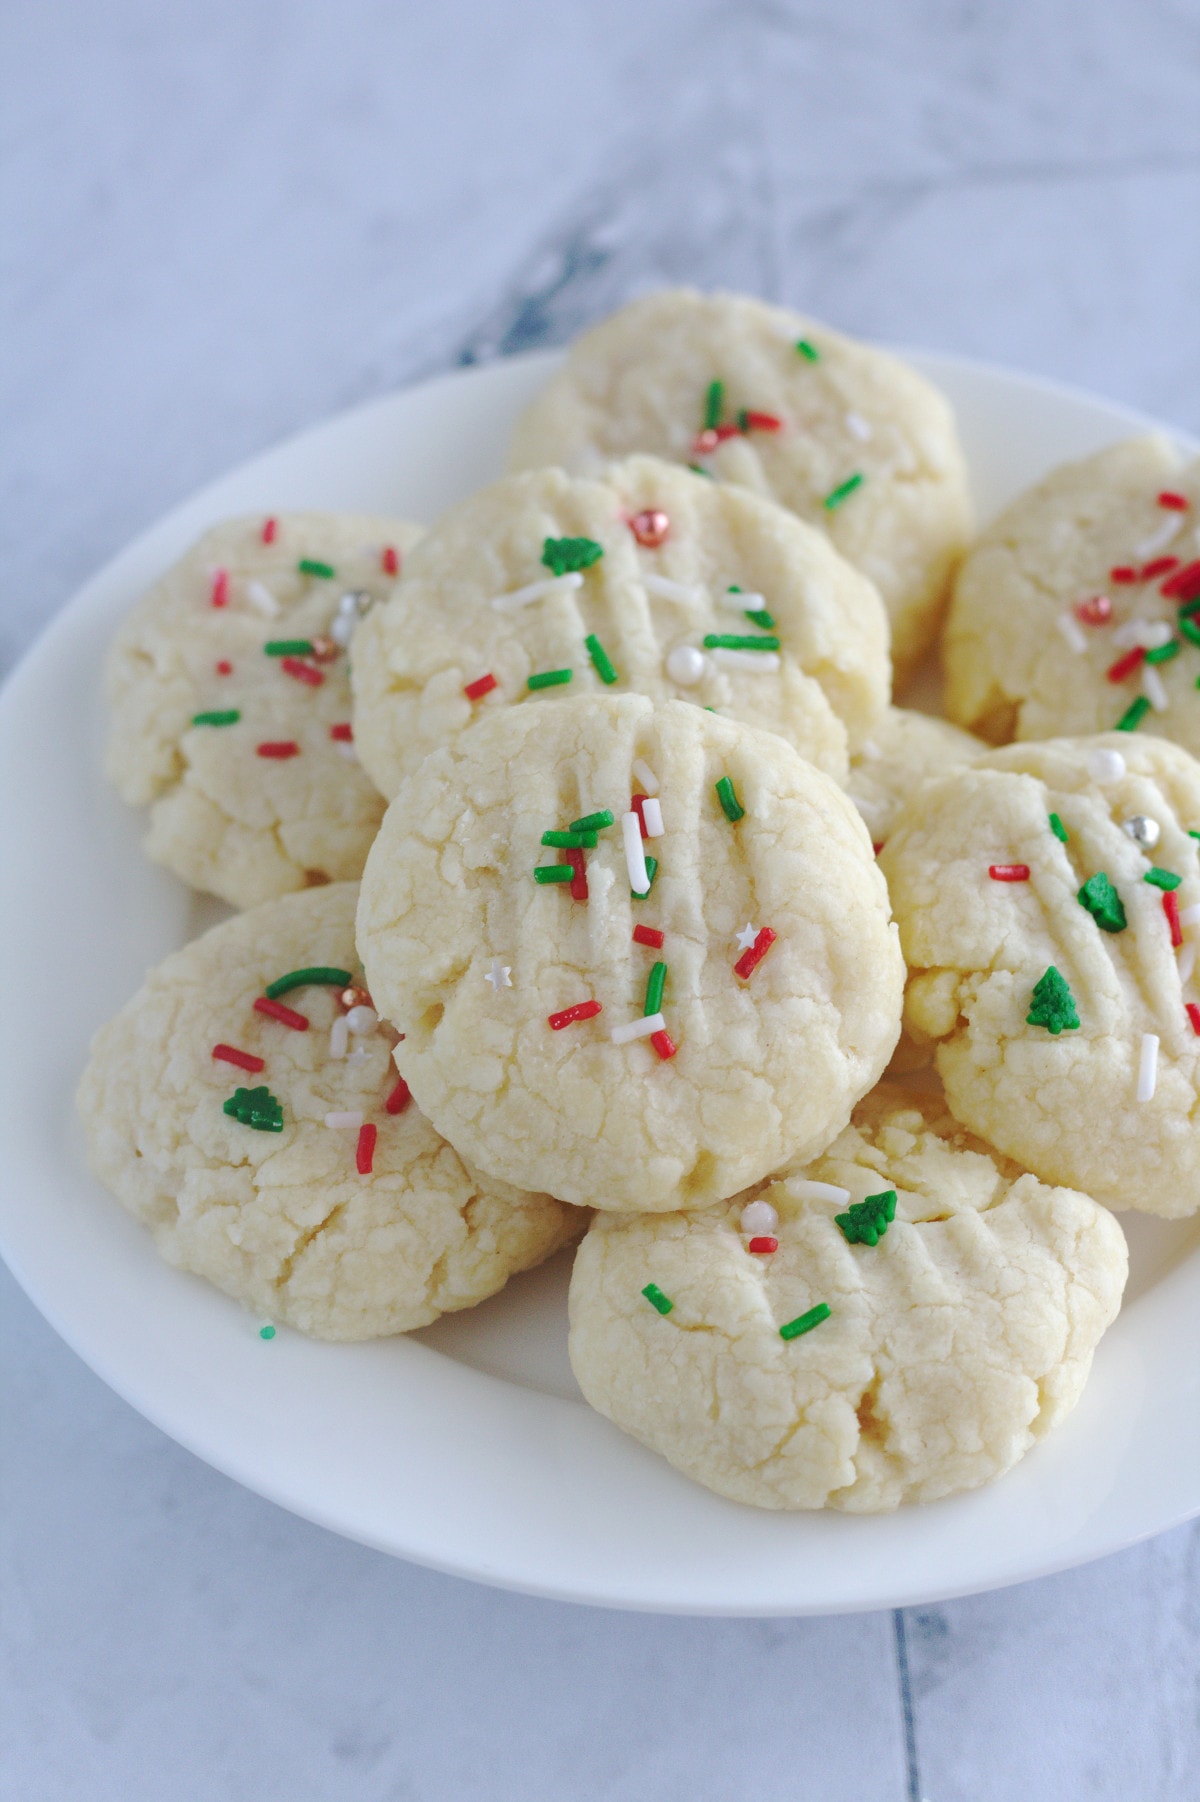 Cookies with red and green sprinkles on top, sit on a white plate.